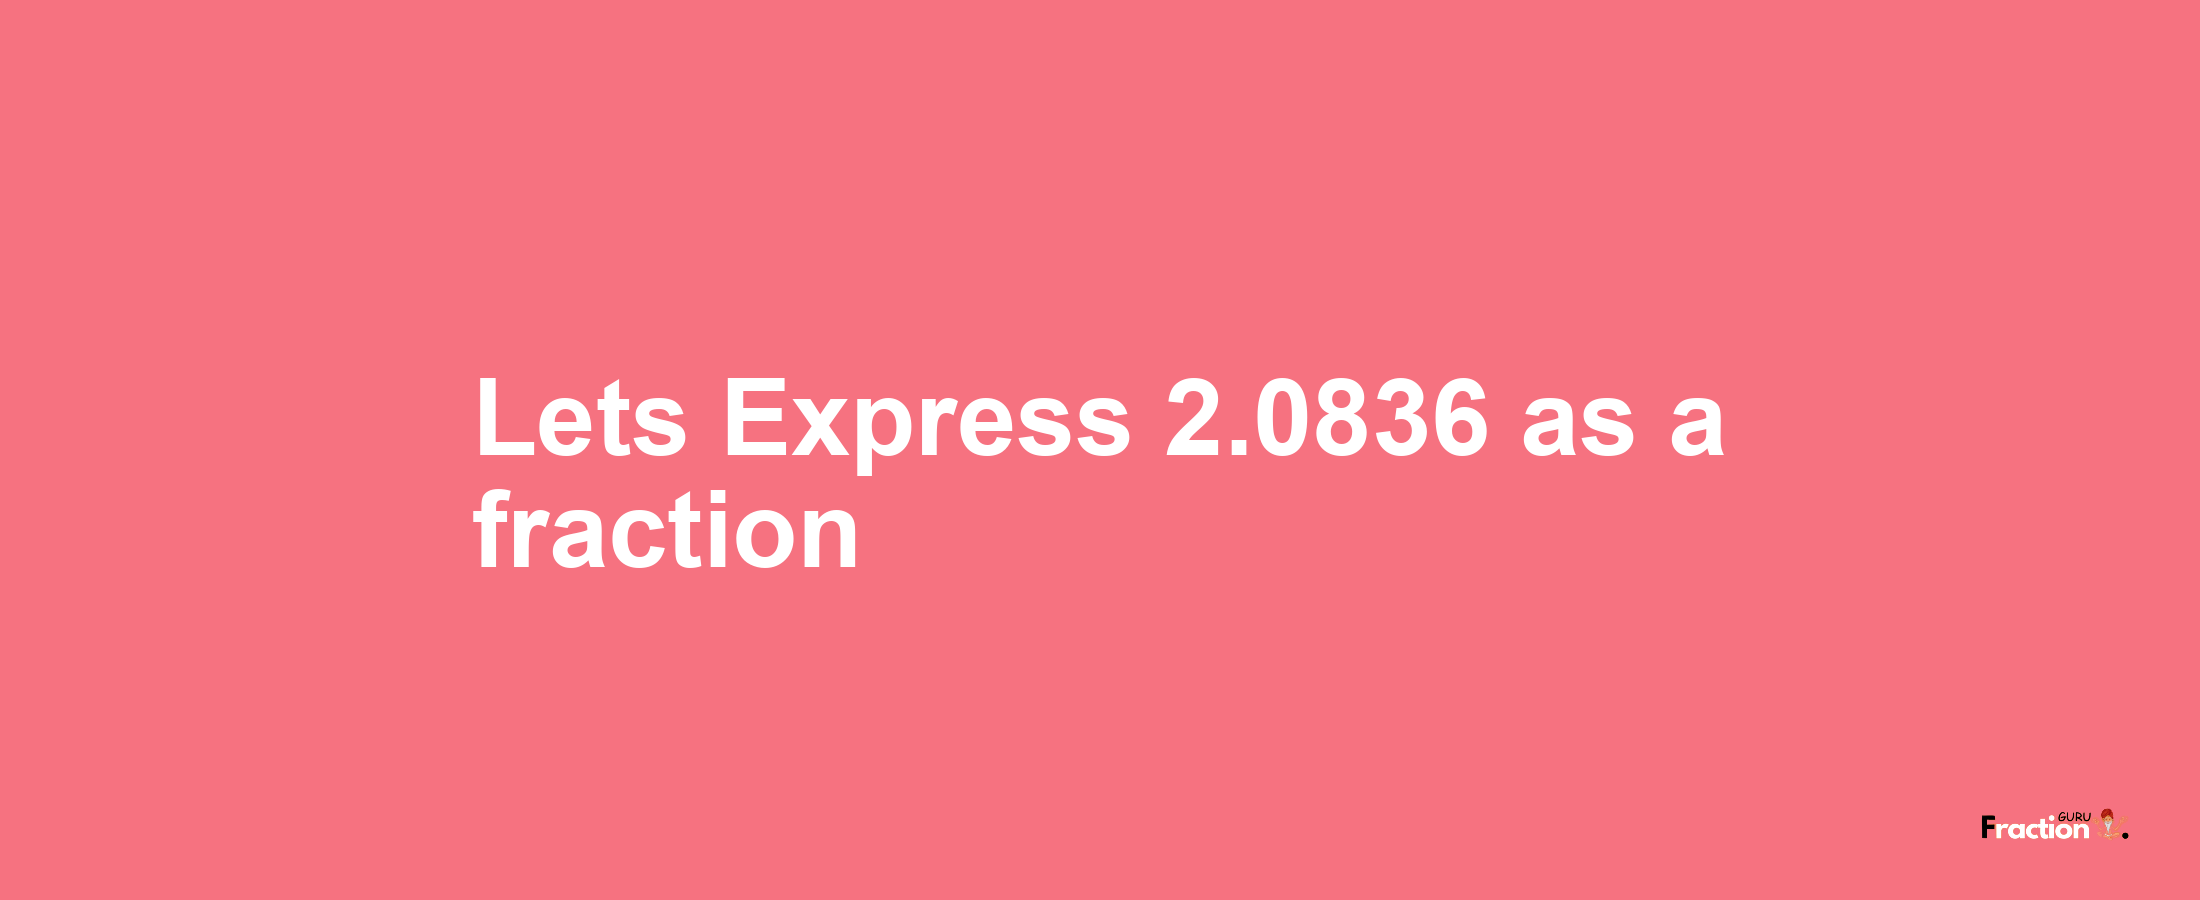 Lets Express 2.0836 as afraction